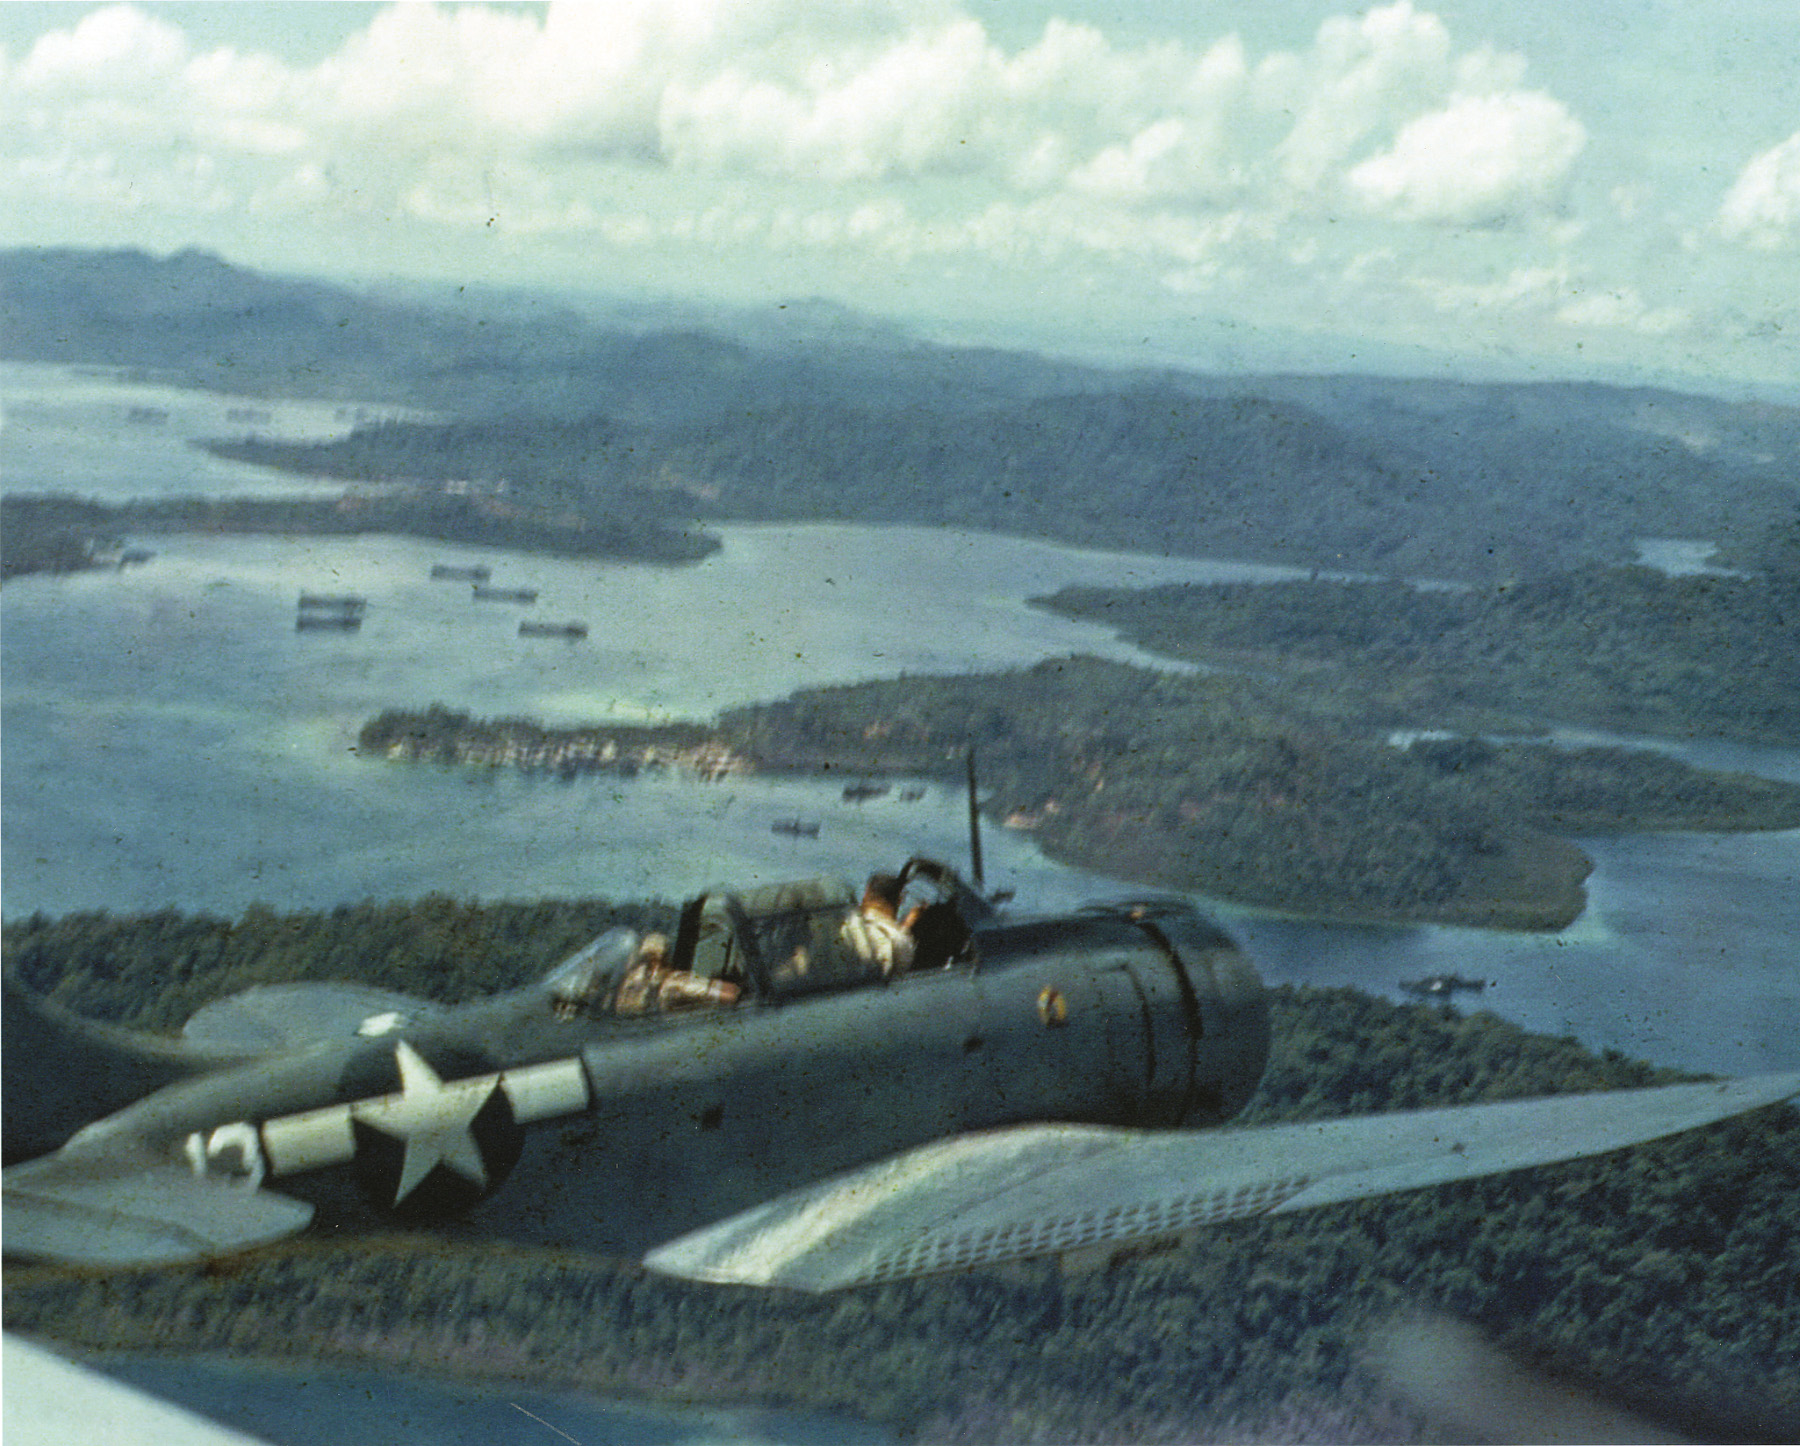 A U.S. SBD Dauntless dive-bomber cruises over the Solomons. The Dauntless wreaked havoc on Japanese shipping and contributed heavily to turning the tide in the Pacific.